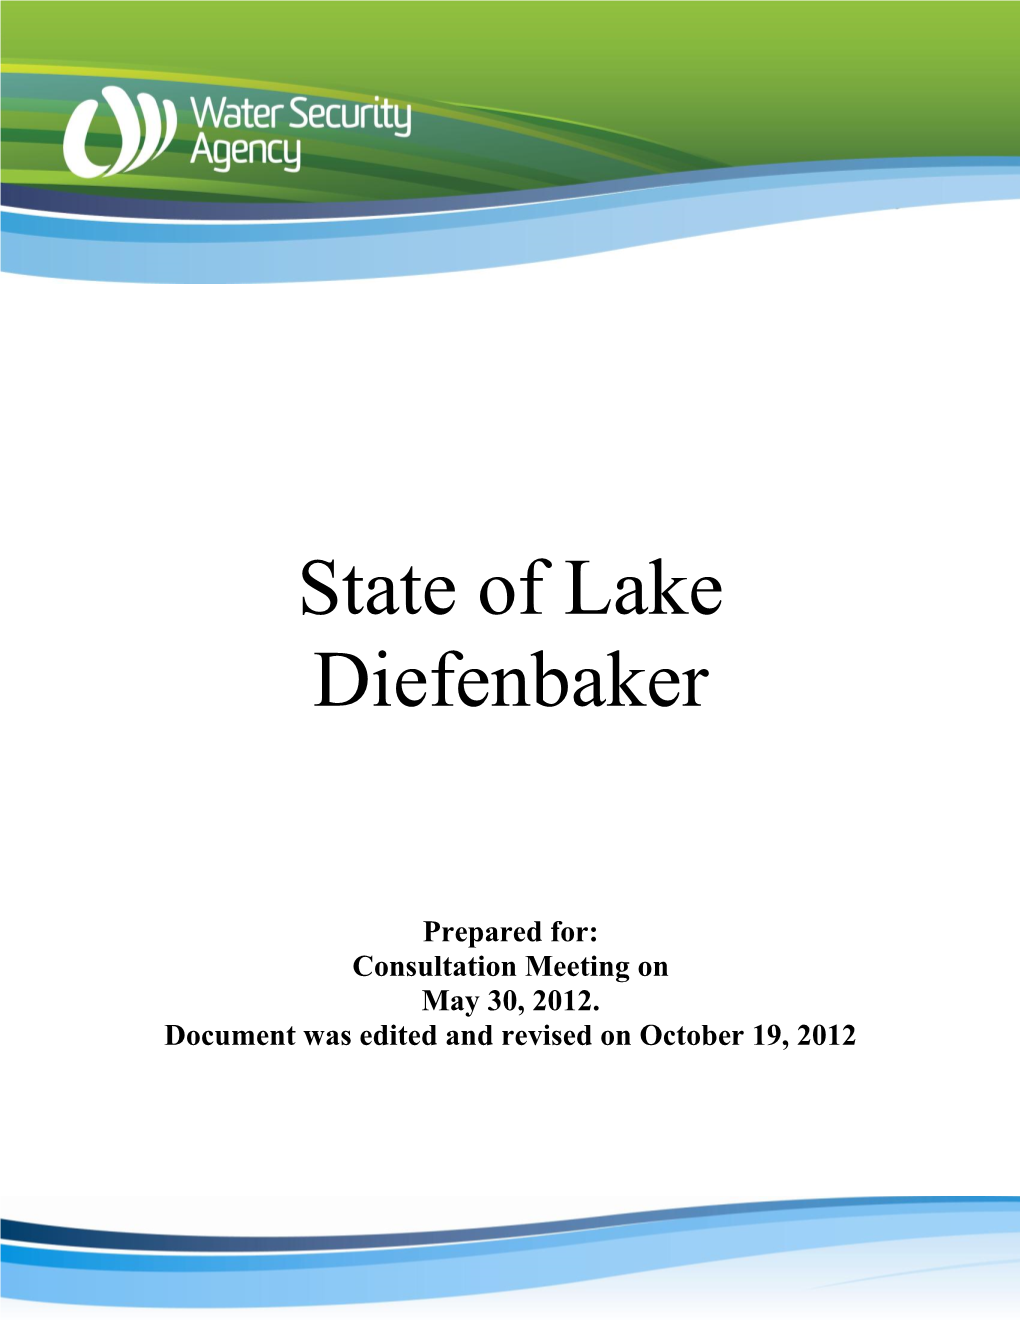 State of Lake Diefenbaker Report